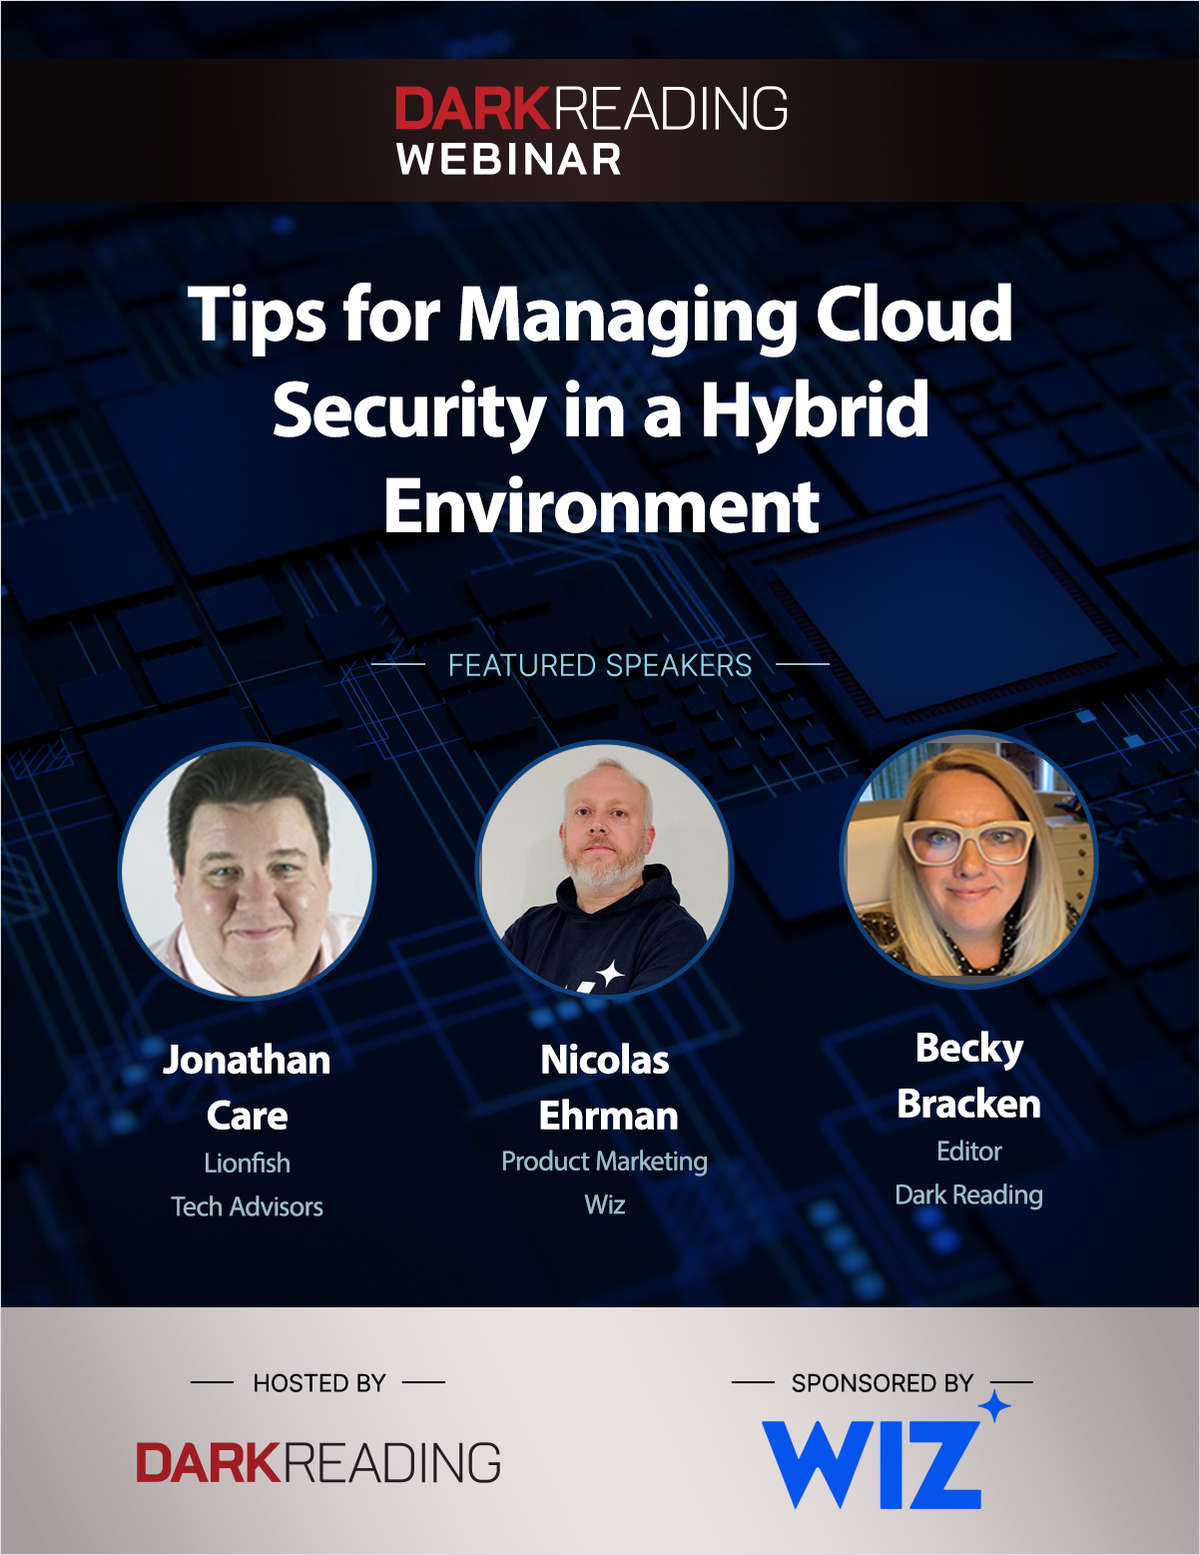 Tips for Managing Cloud Security in a Hybrid Environment